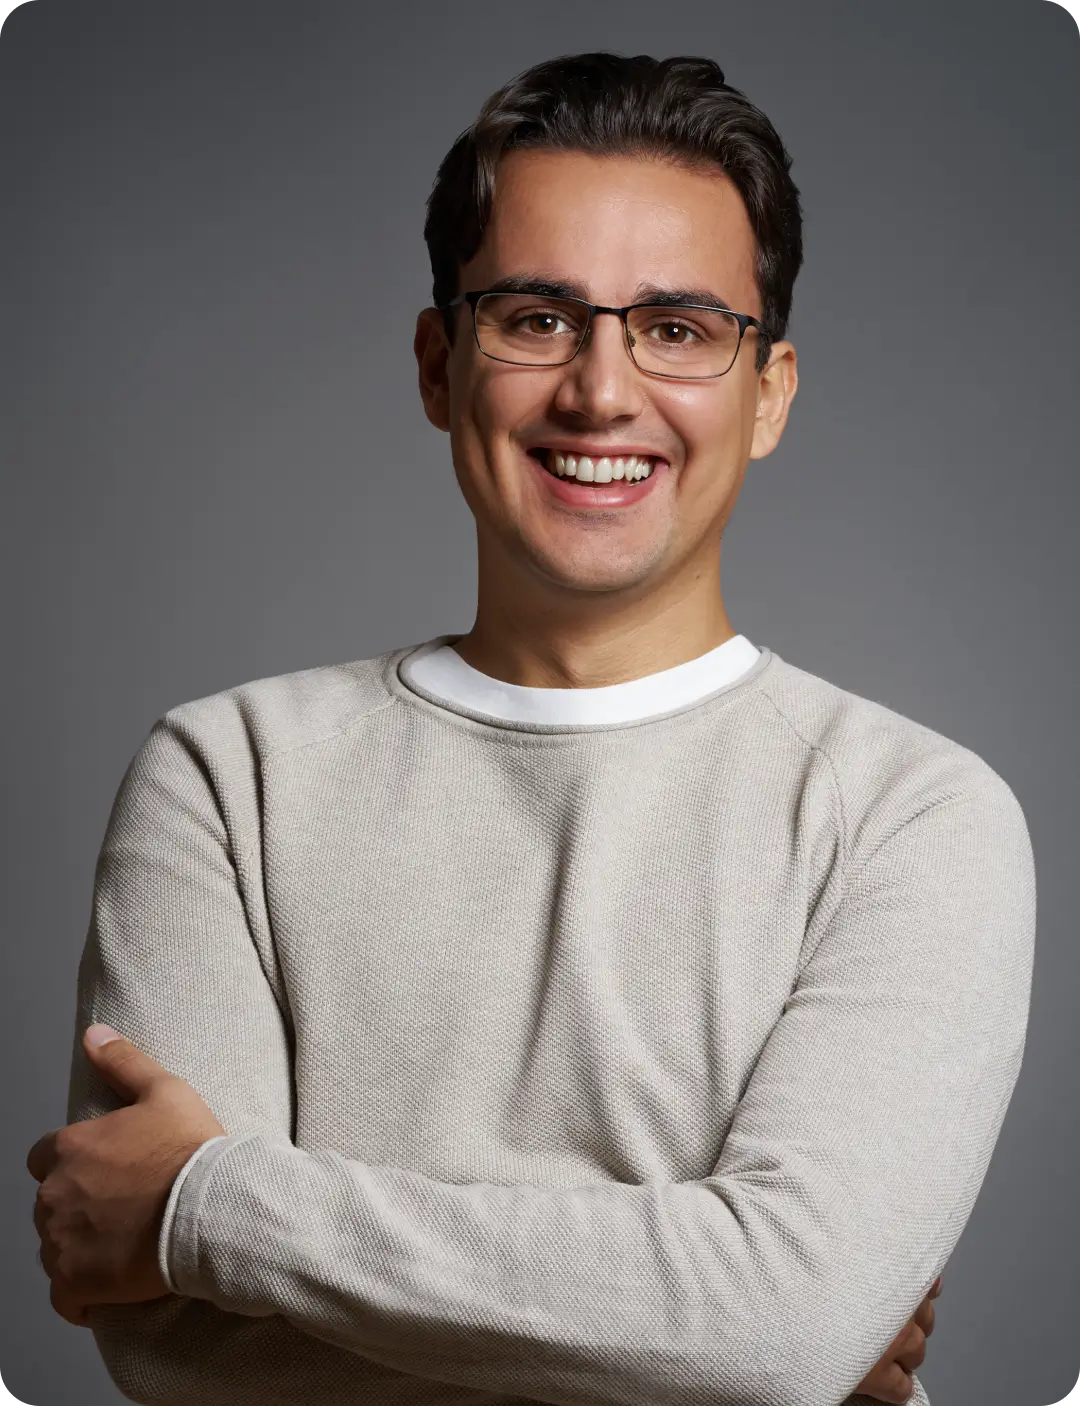 Linxact founder and CEO Daniel Lux smiling in front of a grey background